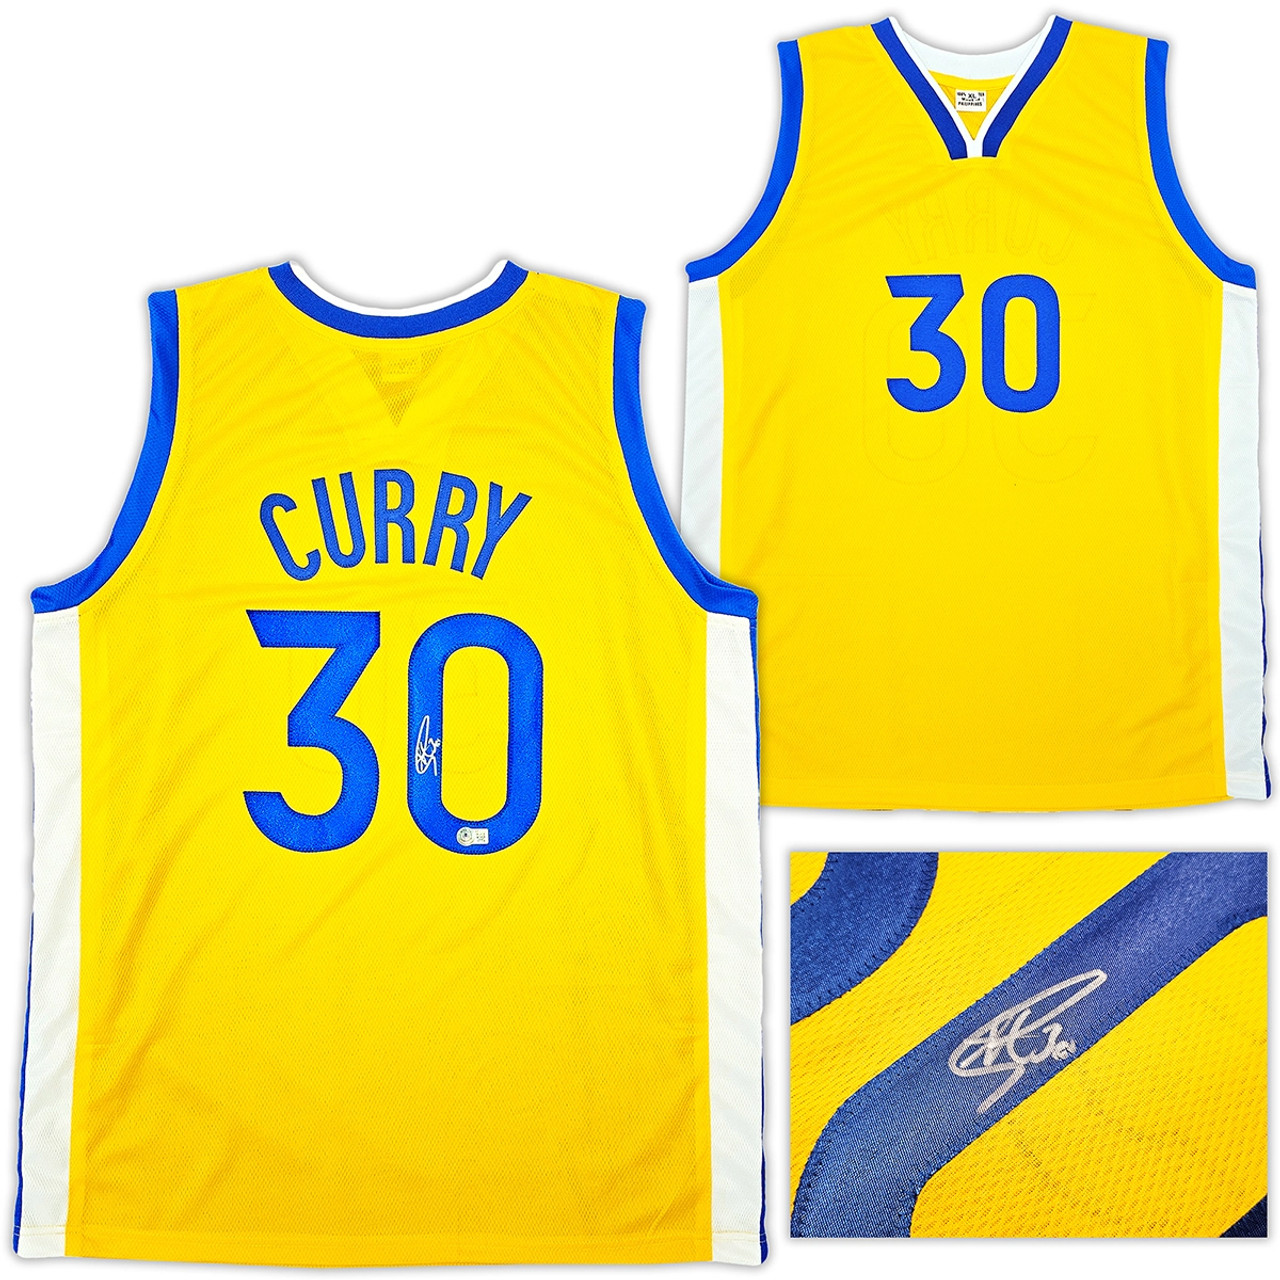 Golden State Warriors Stephen Curry Autographed Yellow Jersey